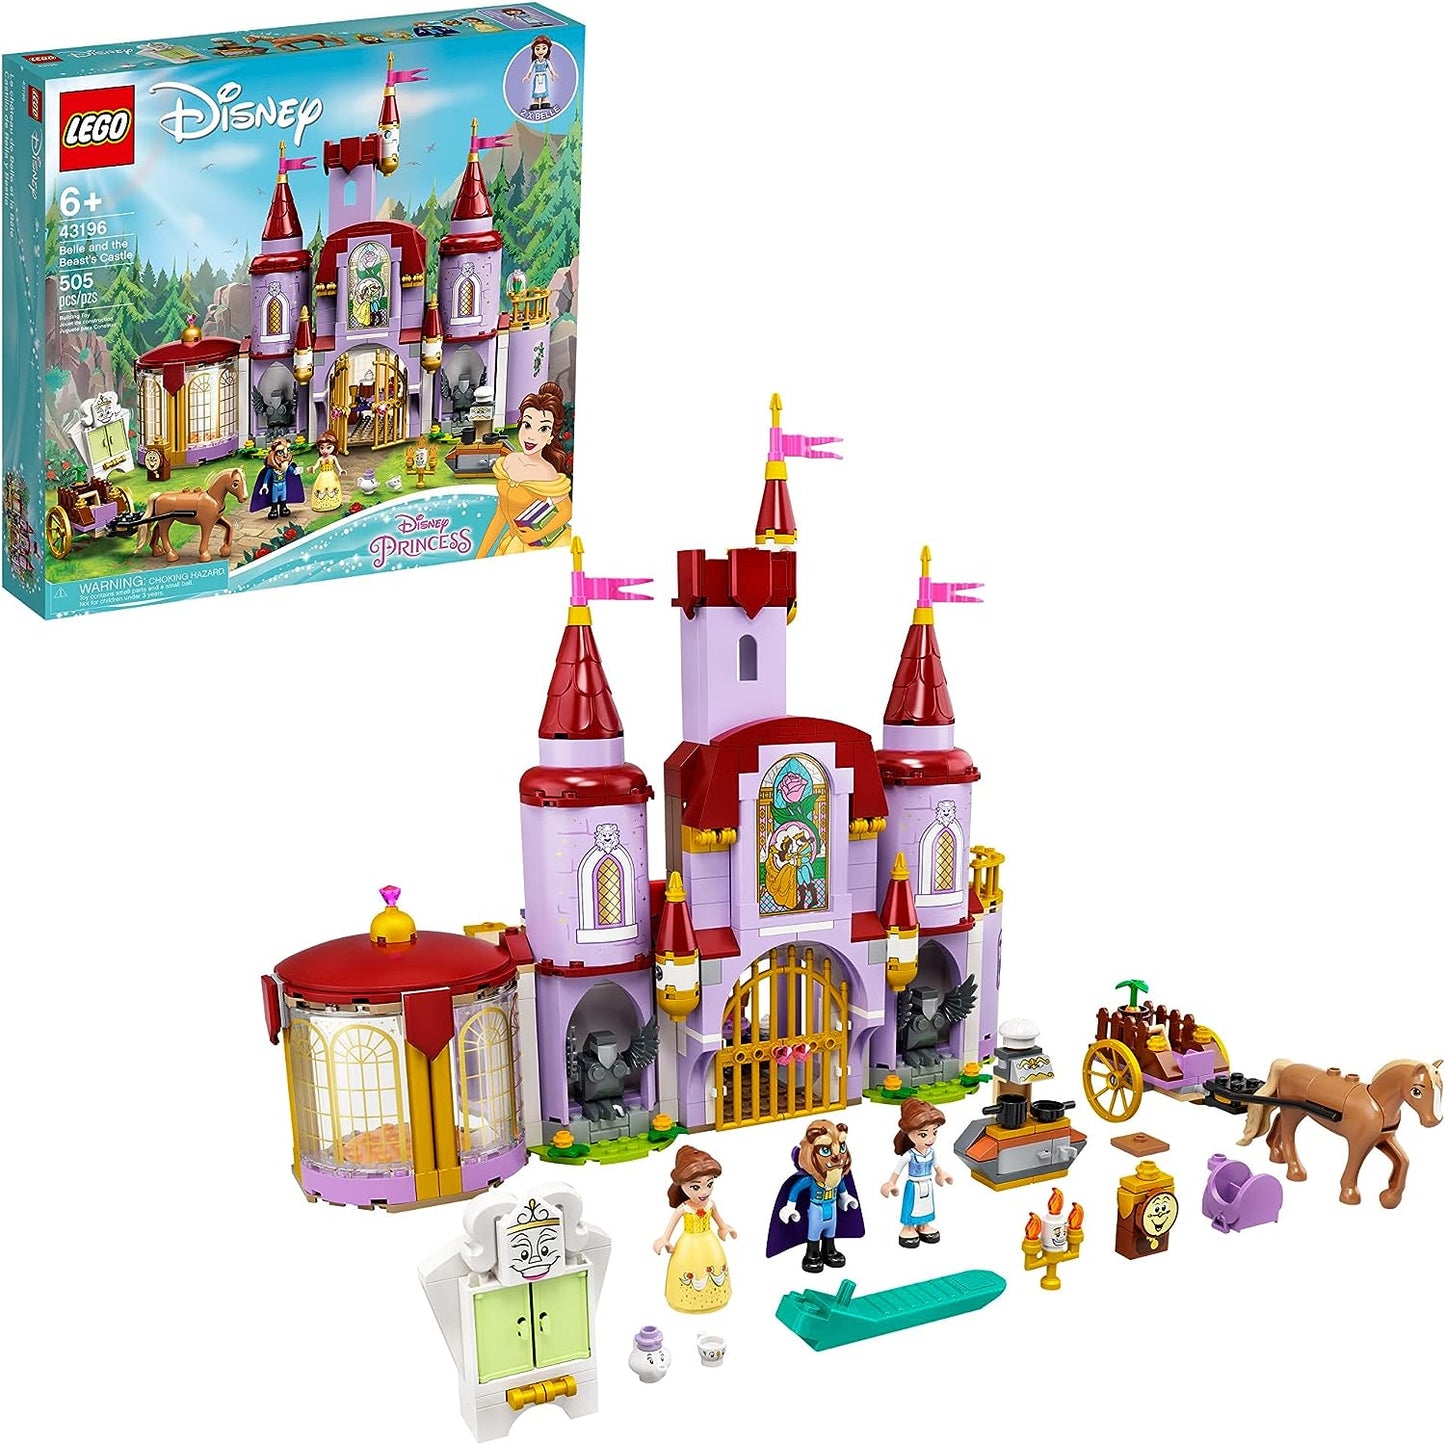 43196 Belle and The Beast's Castle